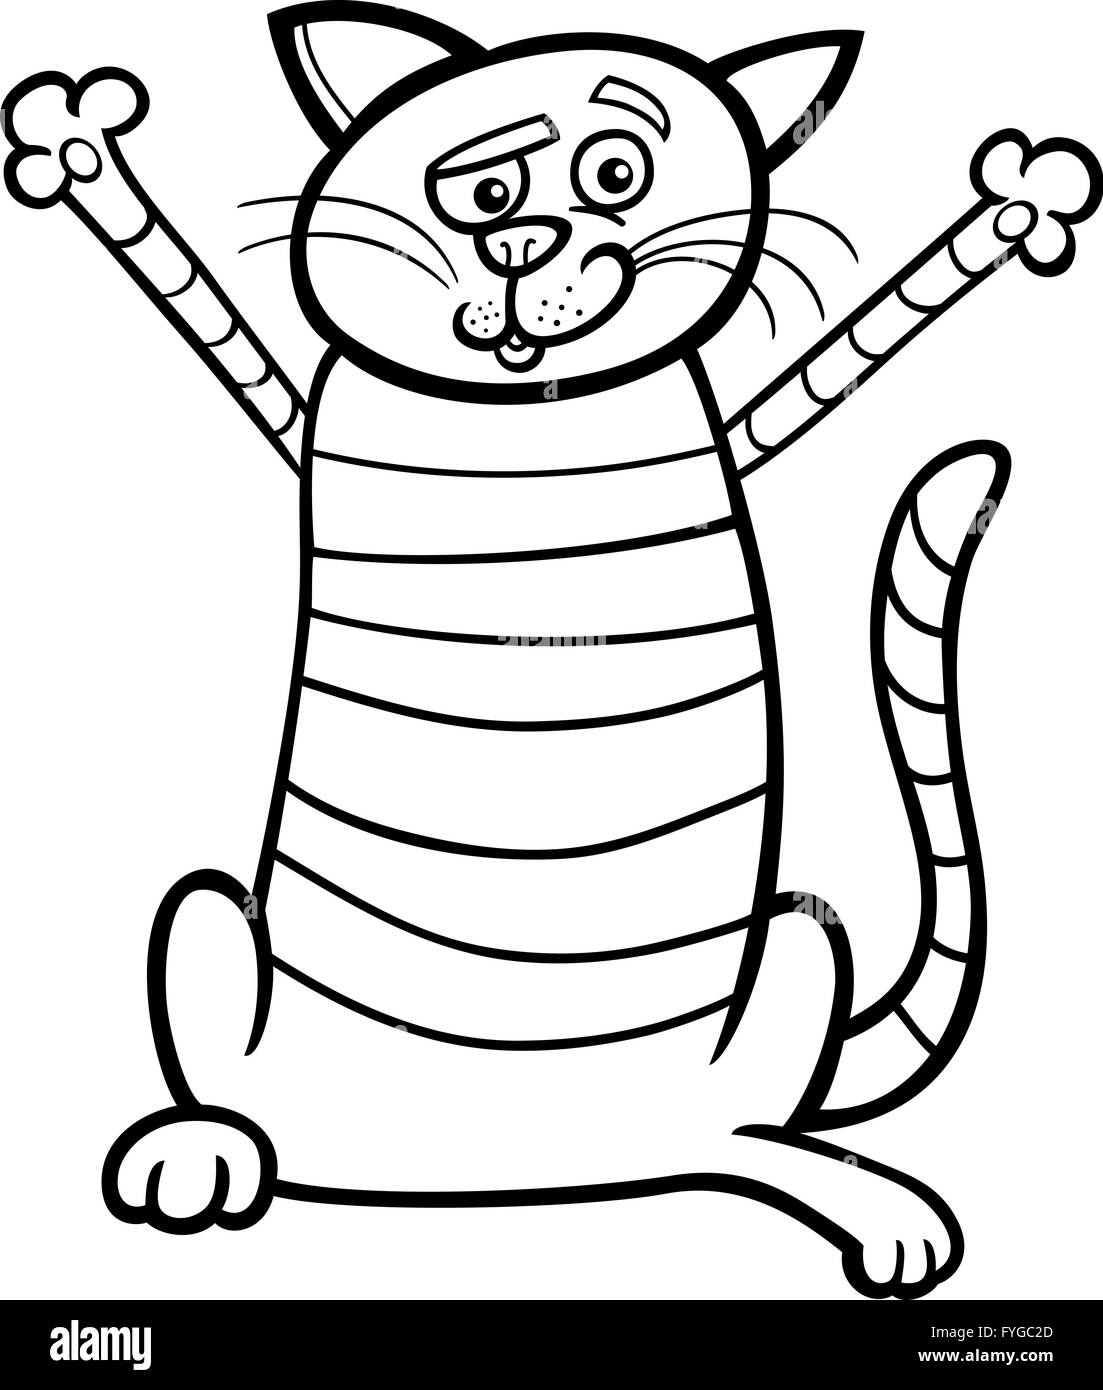 happy cat cartoon for coloring book Stock Photo